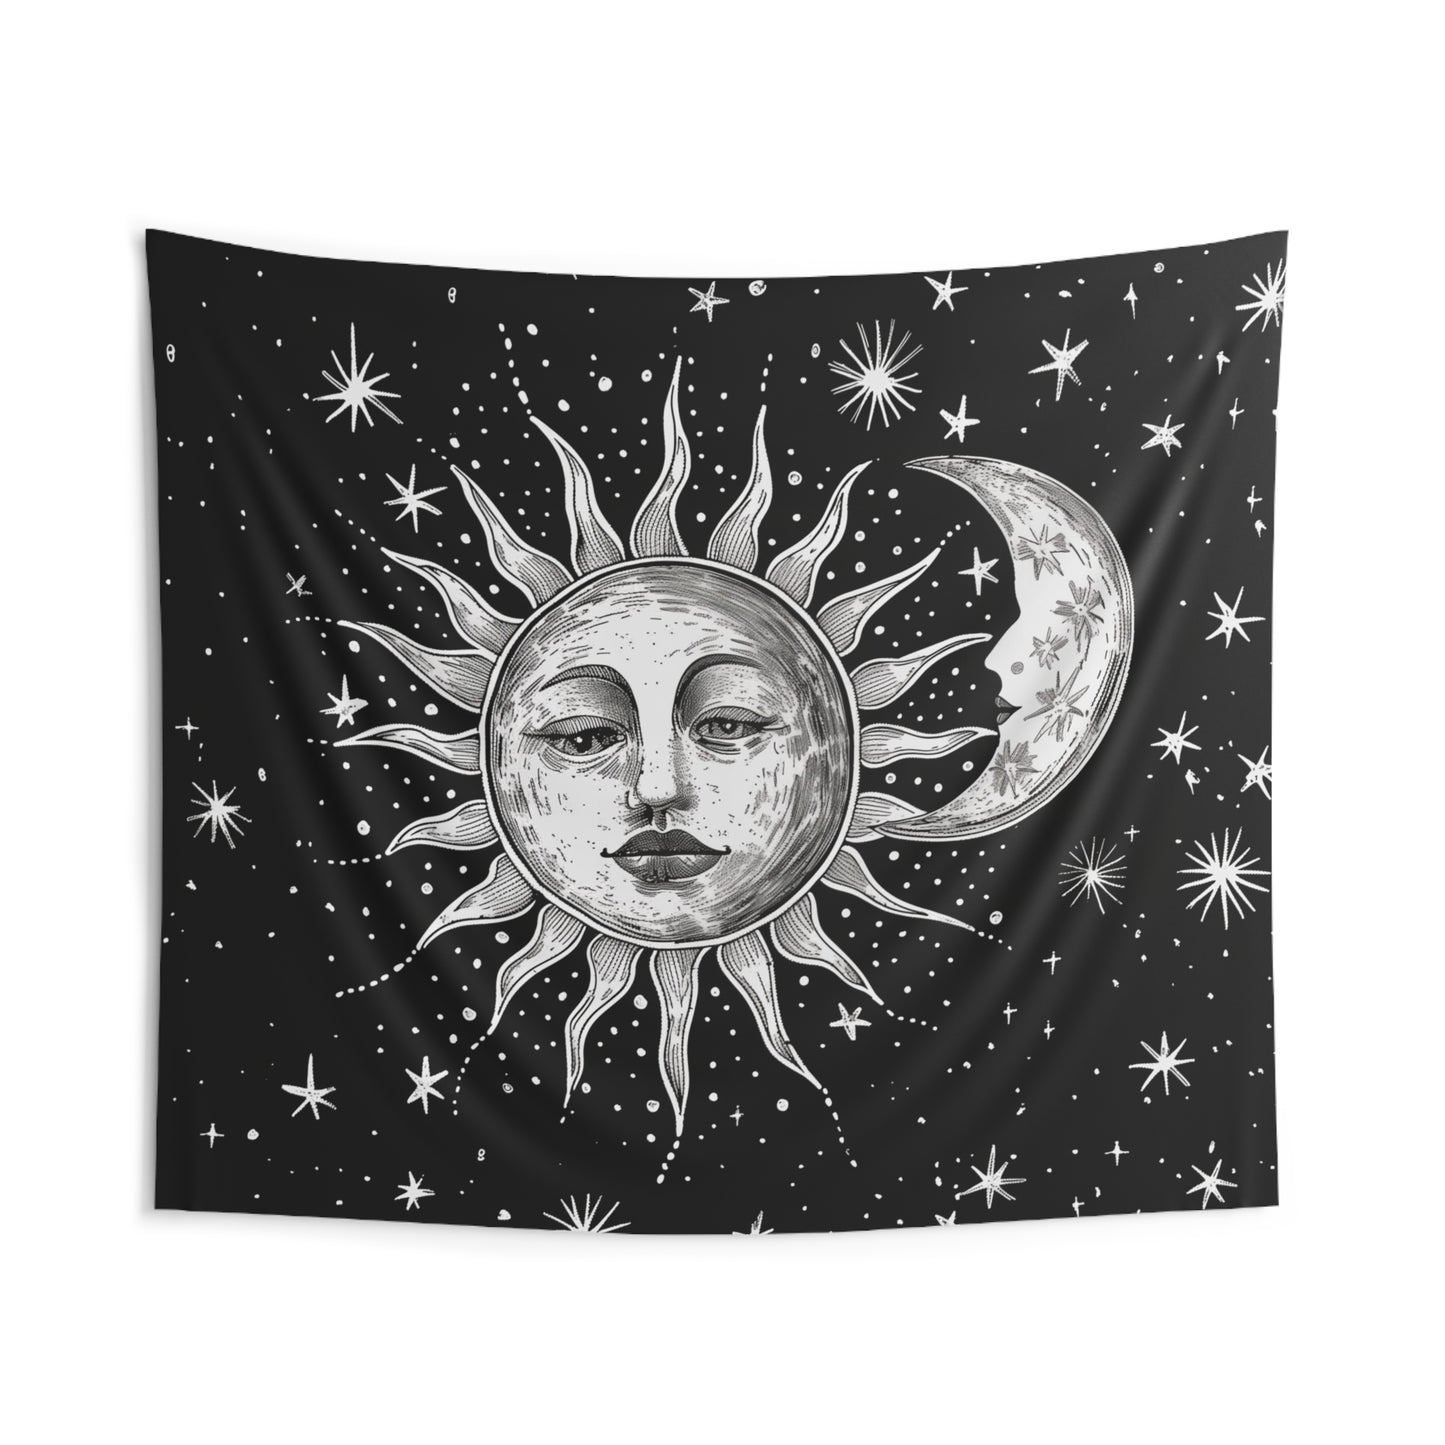 Sun Moon Stars Tapestry, Black White Vintage Retro Wall Art Hanging Unique Landscape Aesthetic Large Small Decor Bedroom College Dorm Room